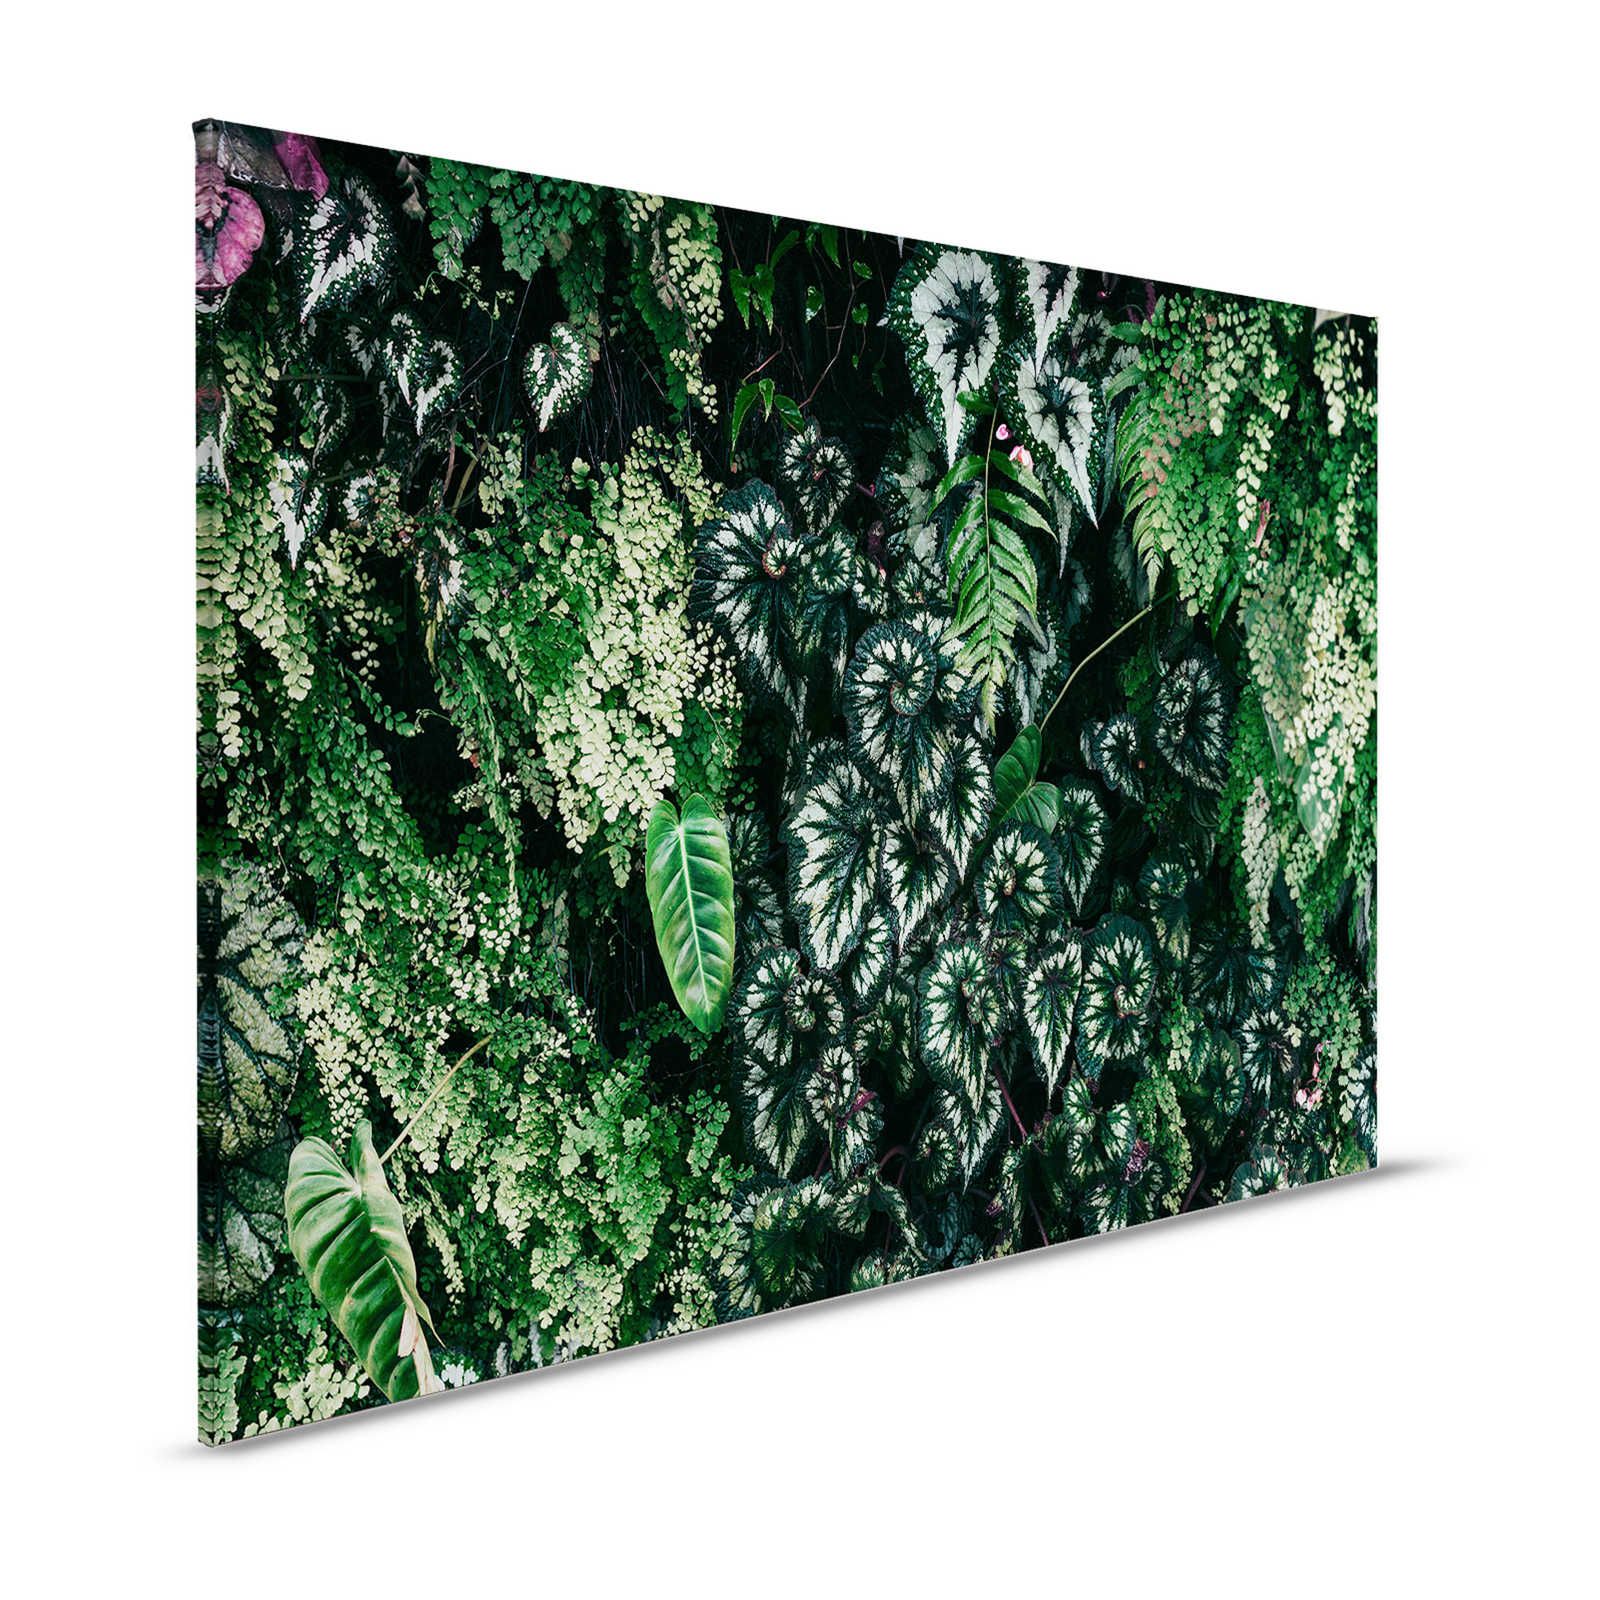 Deep Green 2 - Canvas painting Foliage thicket, ferns & hanging plants - 1.20 m x 0.80 m
